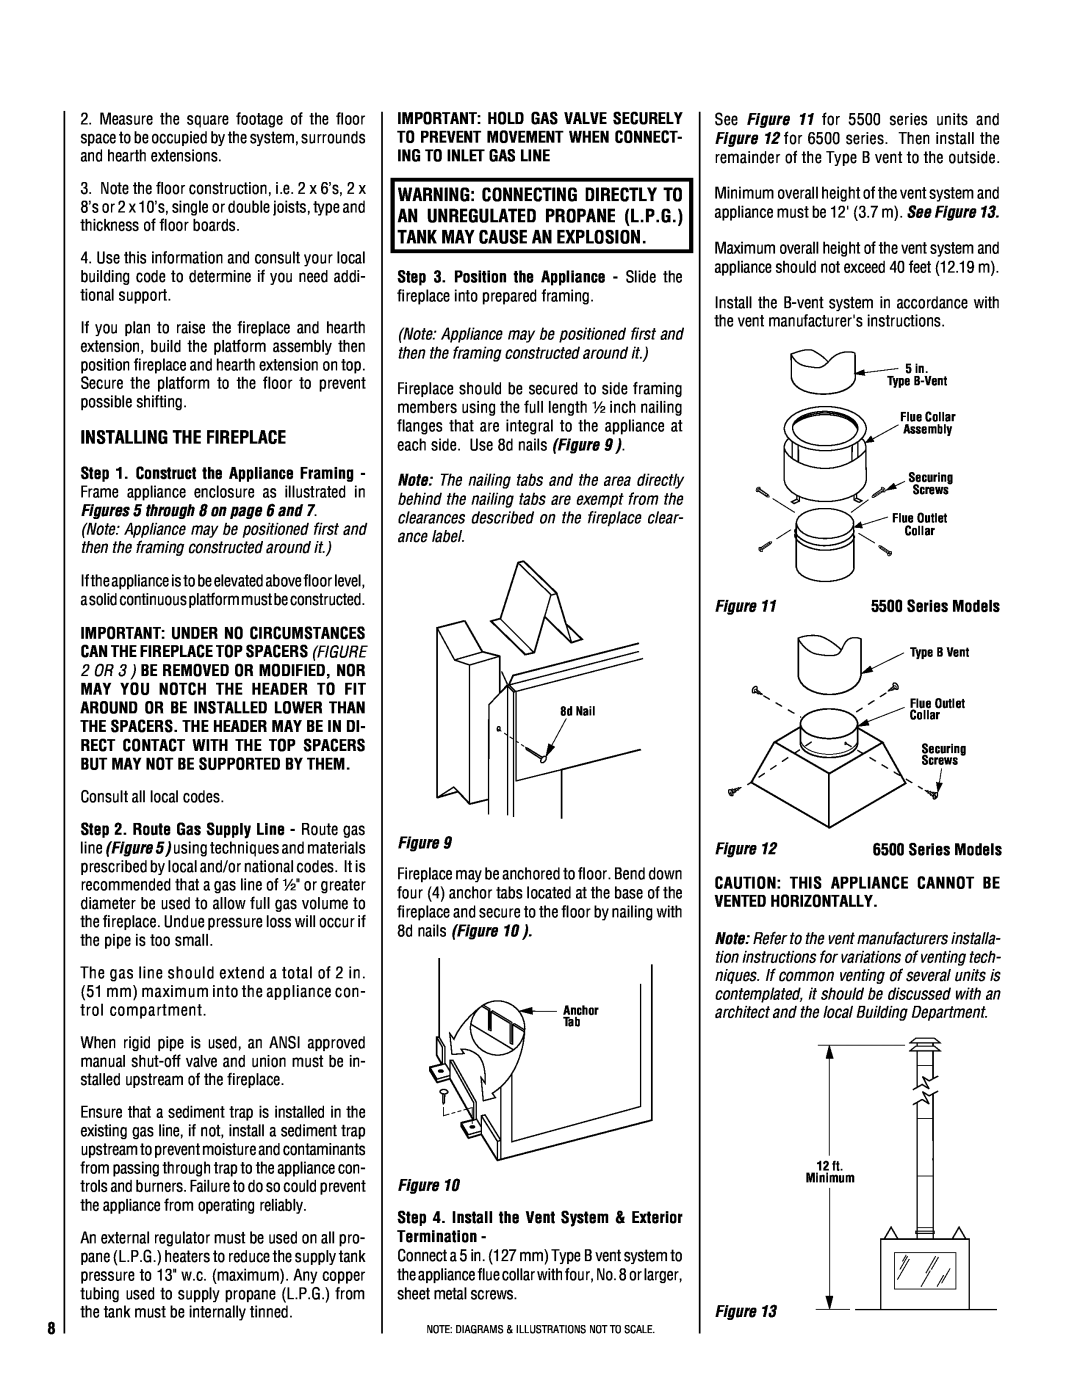 Superior GHC/GRD-5500 installation instructions 